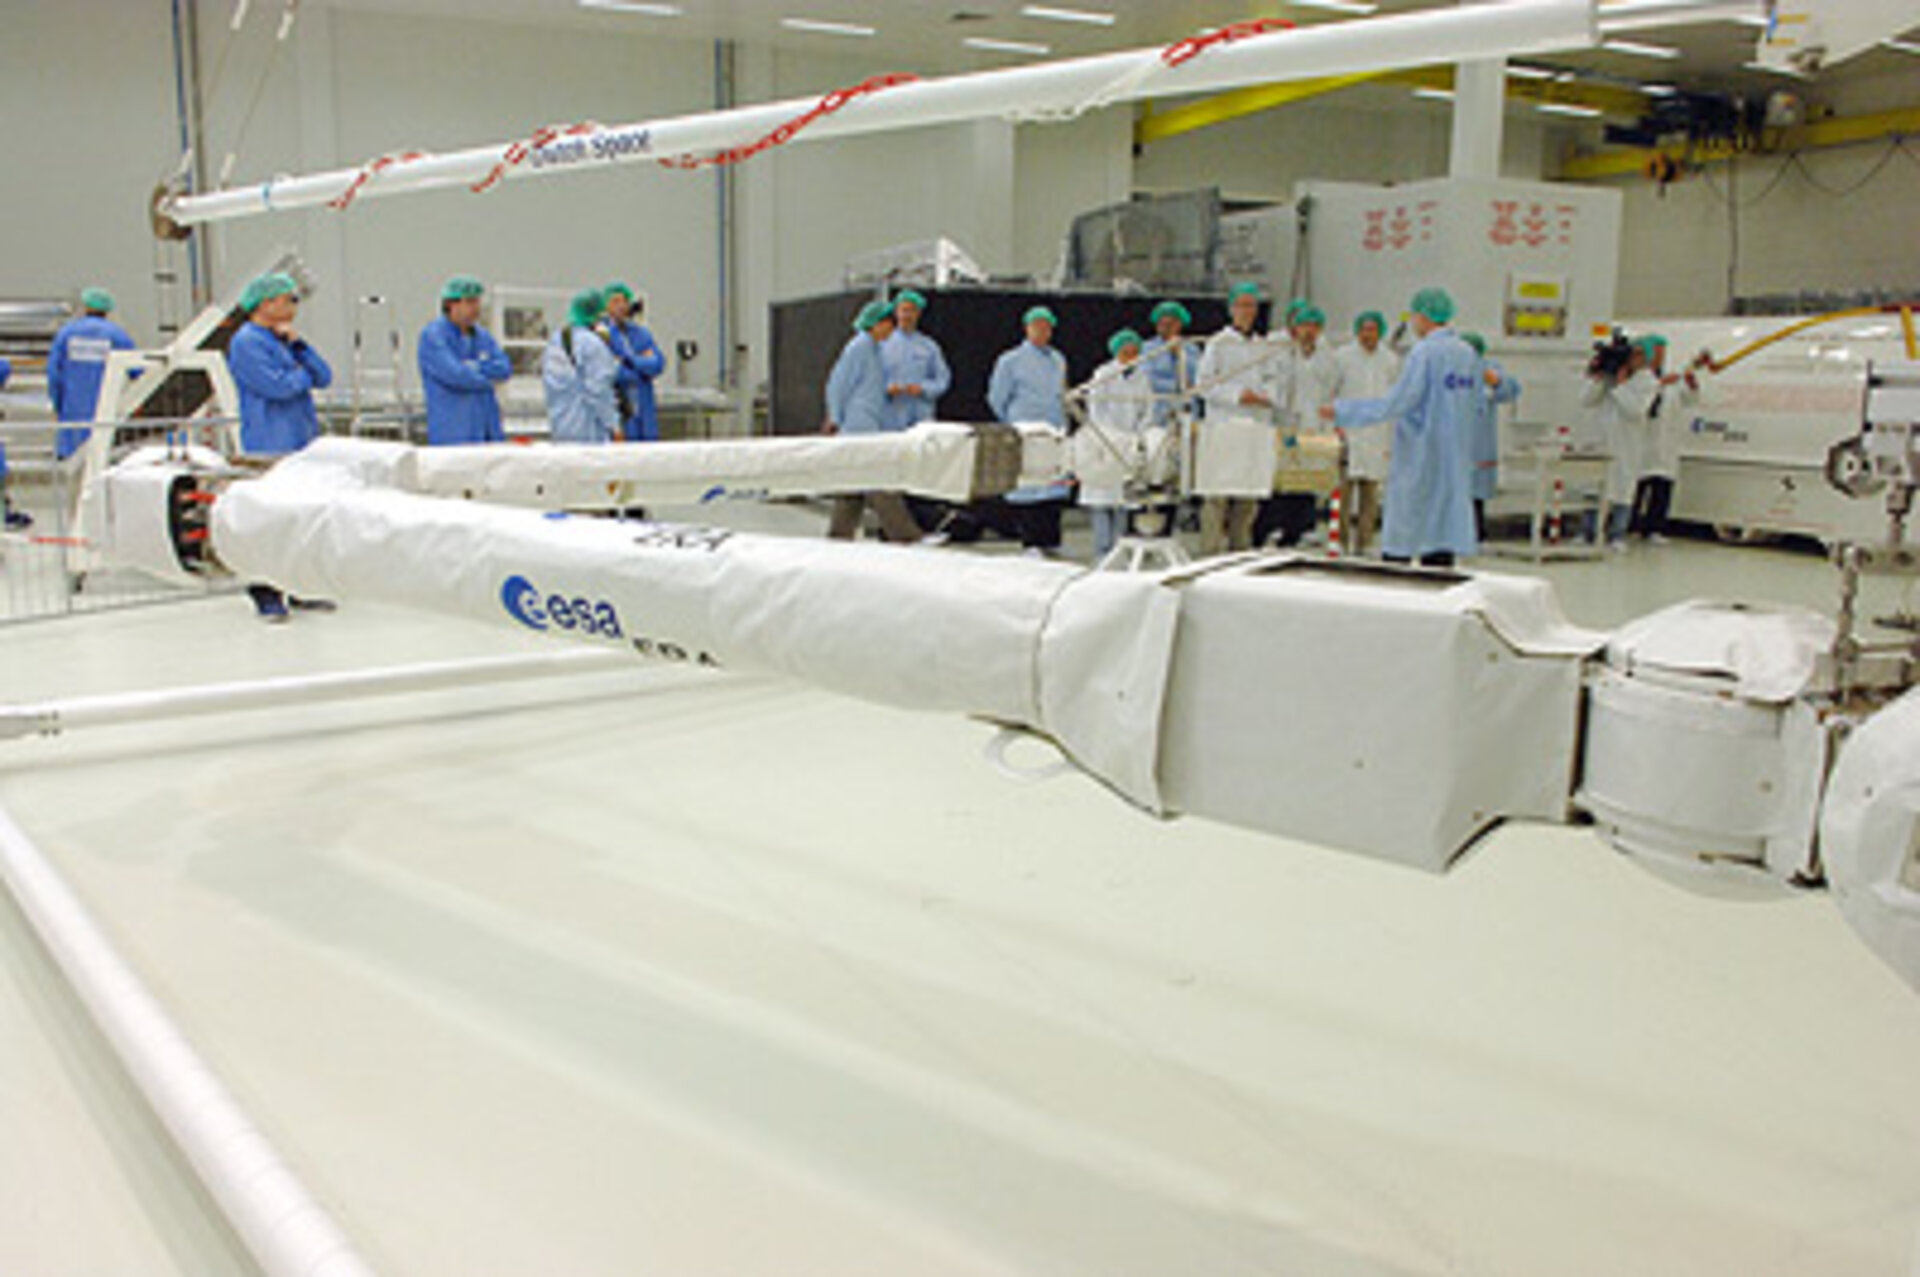 ERA's inspection task was demonstrated in the clean room at Dutch Space